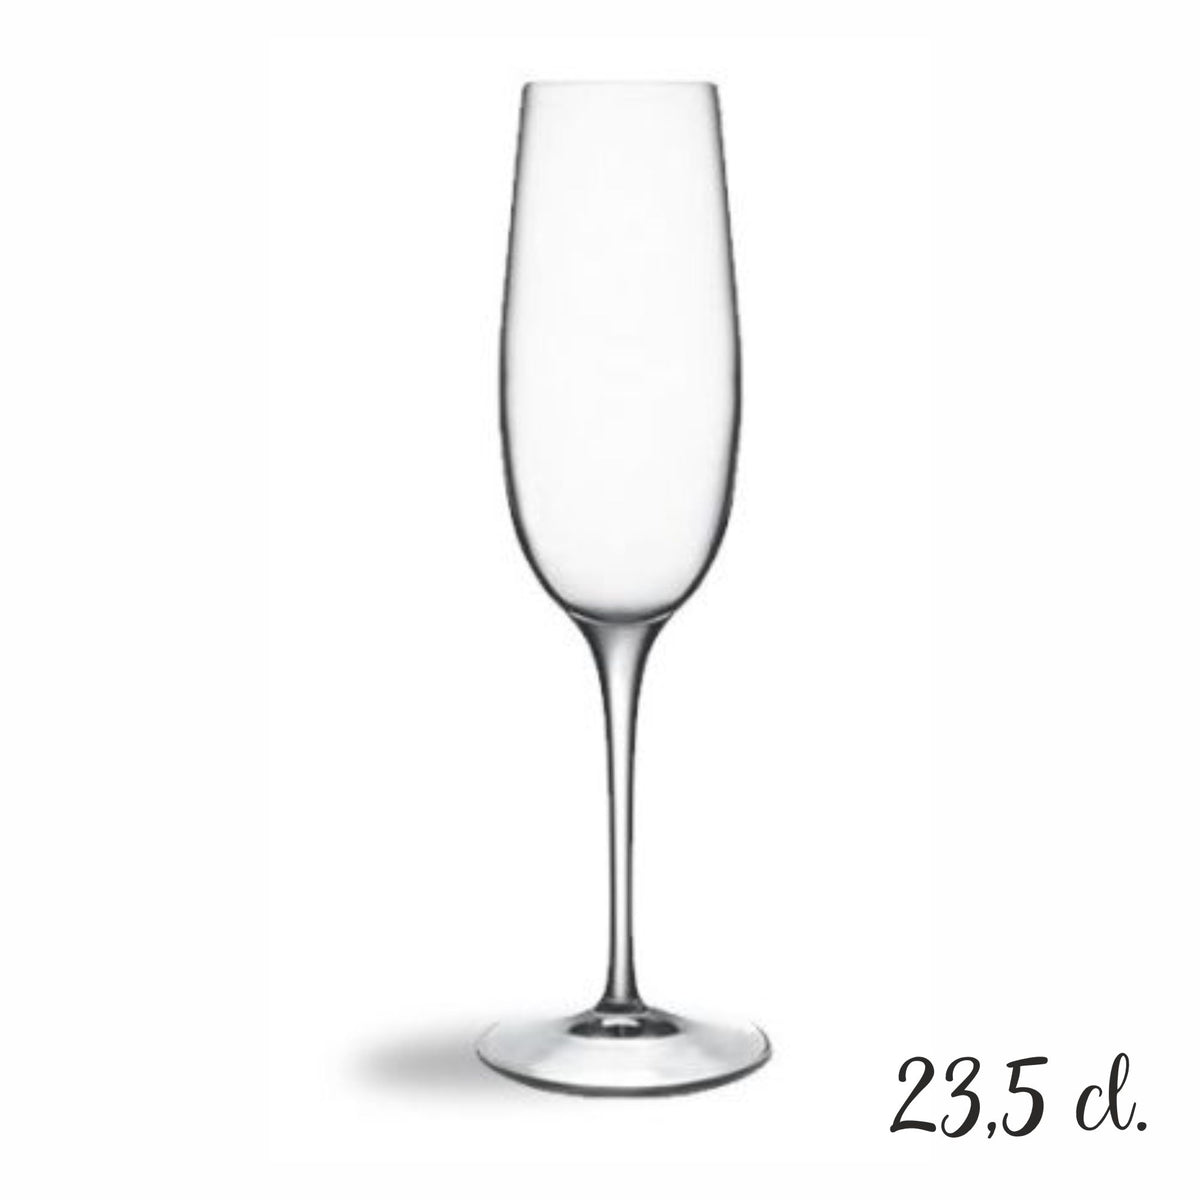 FLUTE lovely 23.5 cl Personalizzato